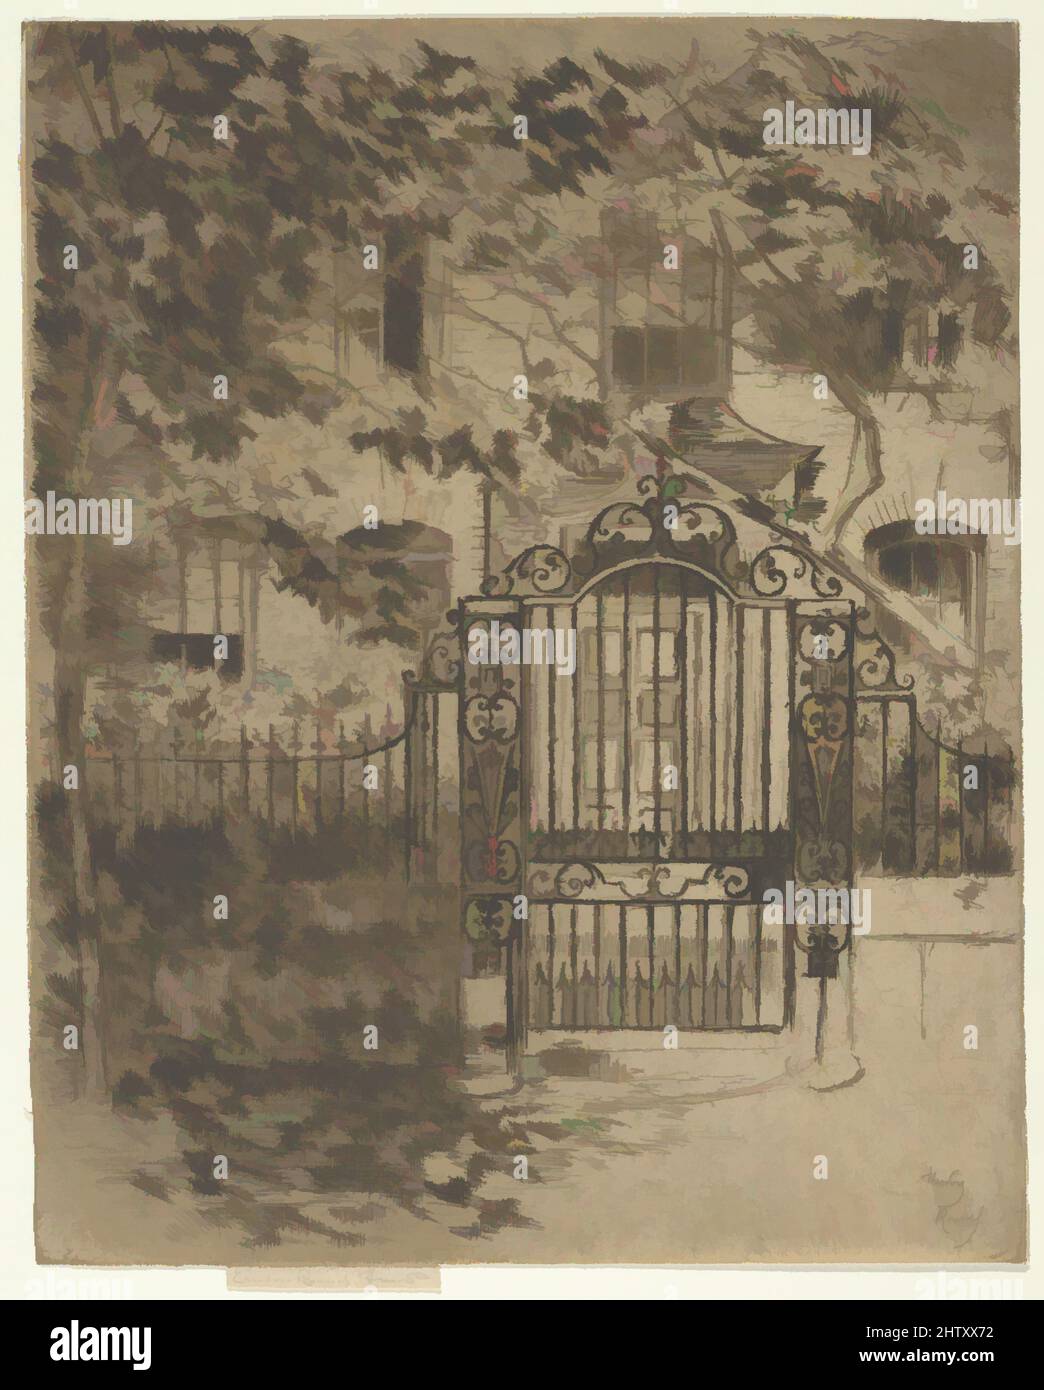 Art inspired by The Gate. Chelsea, 1889–90, Etching and drypoint; fourth state of four, Image: 8 3/16 x 6 9/16 in. (20.8 x 16.7 cm), Prints, Classic works modernized by Artotop with a splash of modernity. Shapes, color and value, eye-catching visual impact on art. Emotions through freedom of artworks in a contemporary way. A timeless message pursuing a wildly creative new direction. Artists turning to the digital medium and creating the Artotop NFT Stock Photo